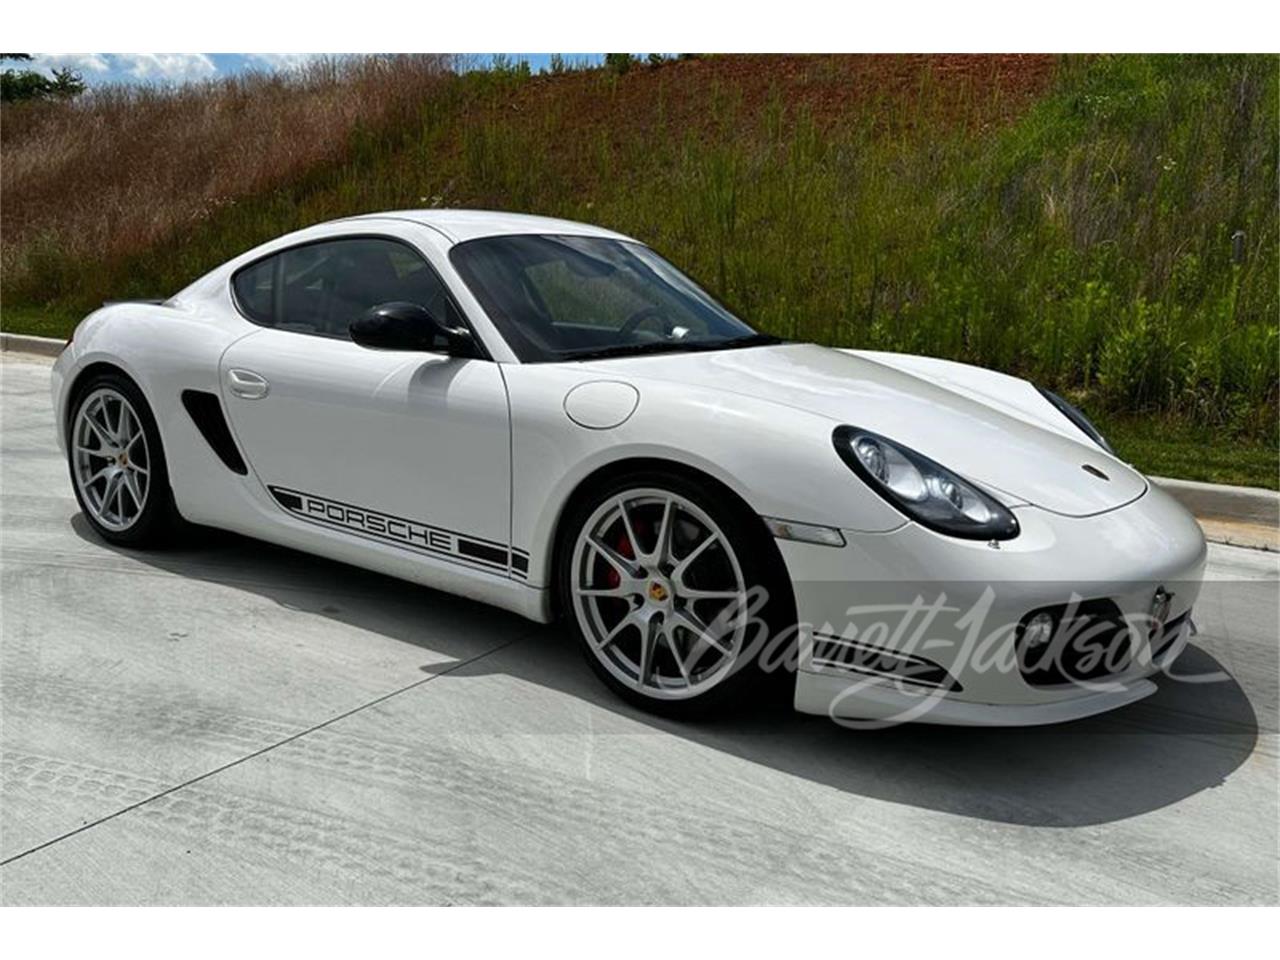 For Sale at Auction: 2012 Porsche Cayman in Scottsdale, Arizona for sale in Scottsdale, AZ